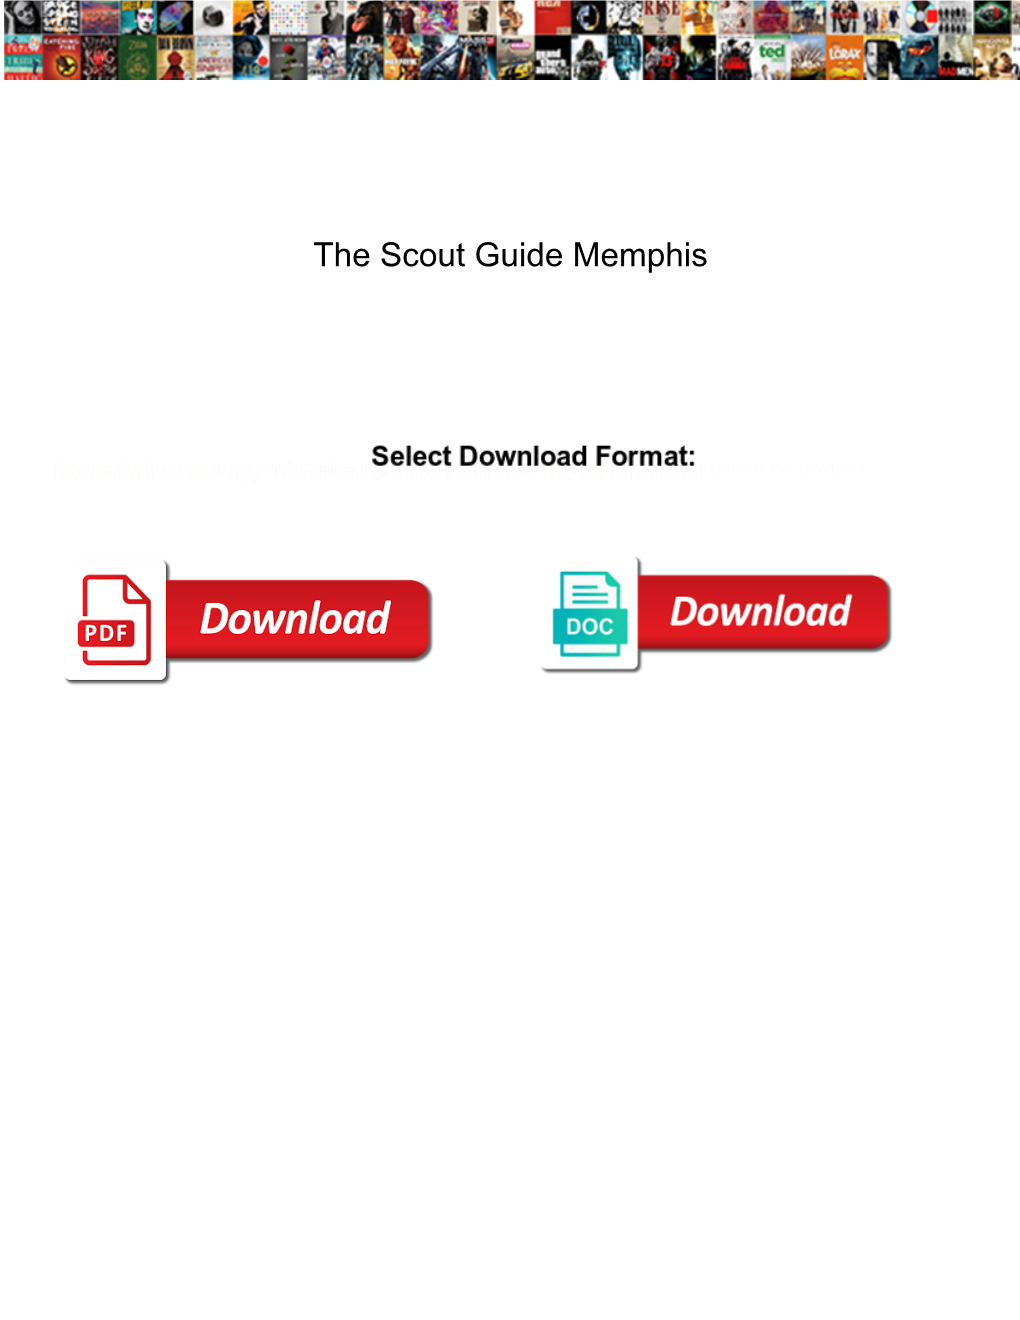 The Scout Guide Memphis